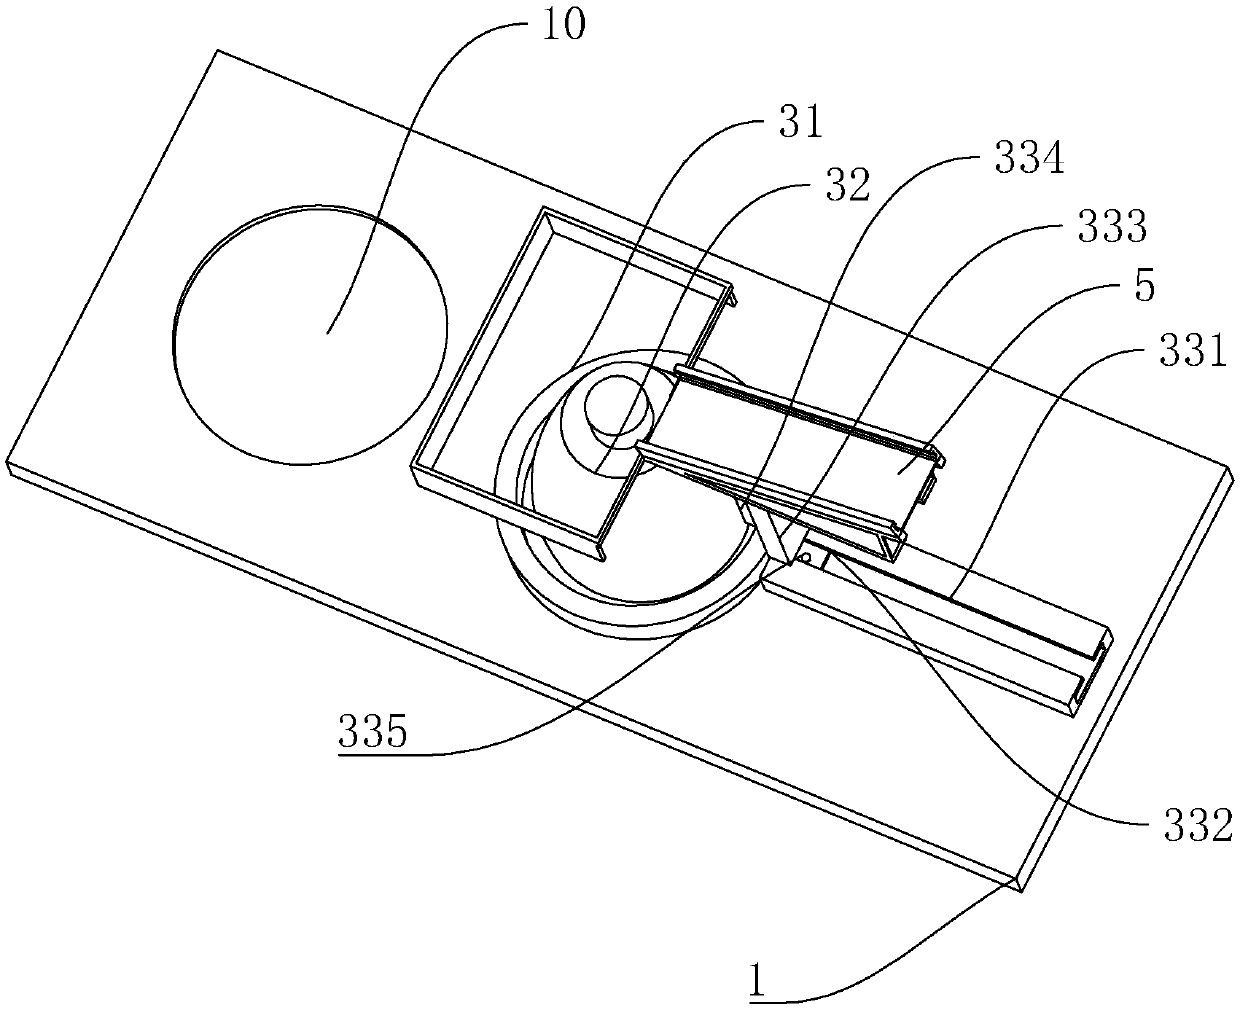 Stator sheet collecting device